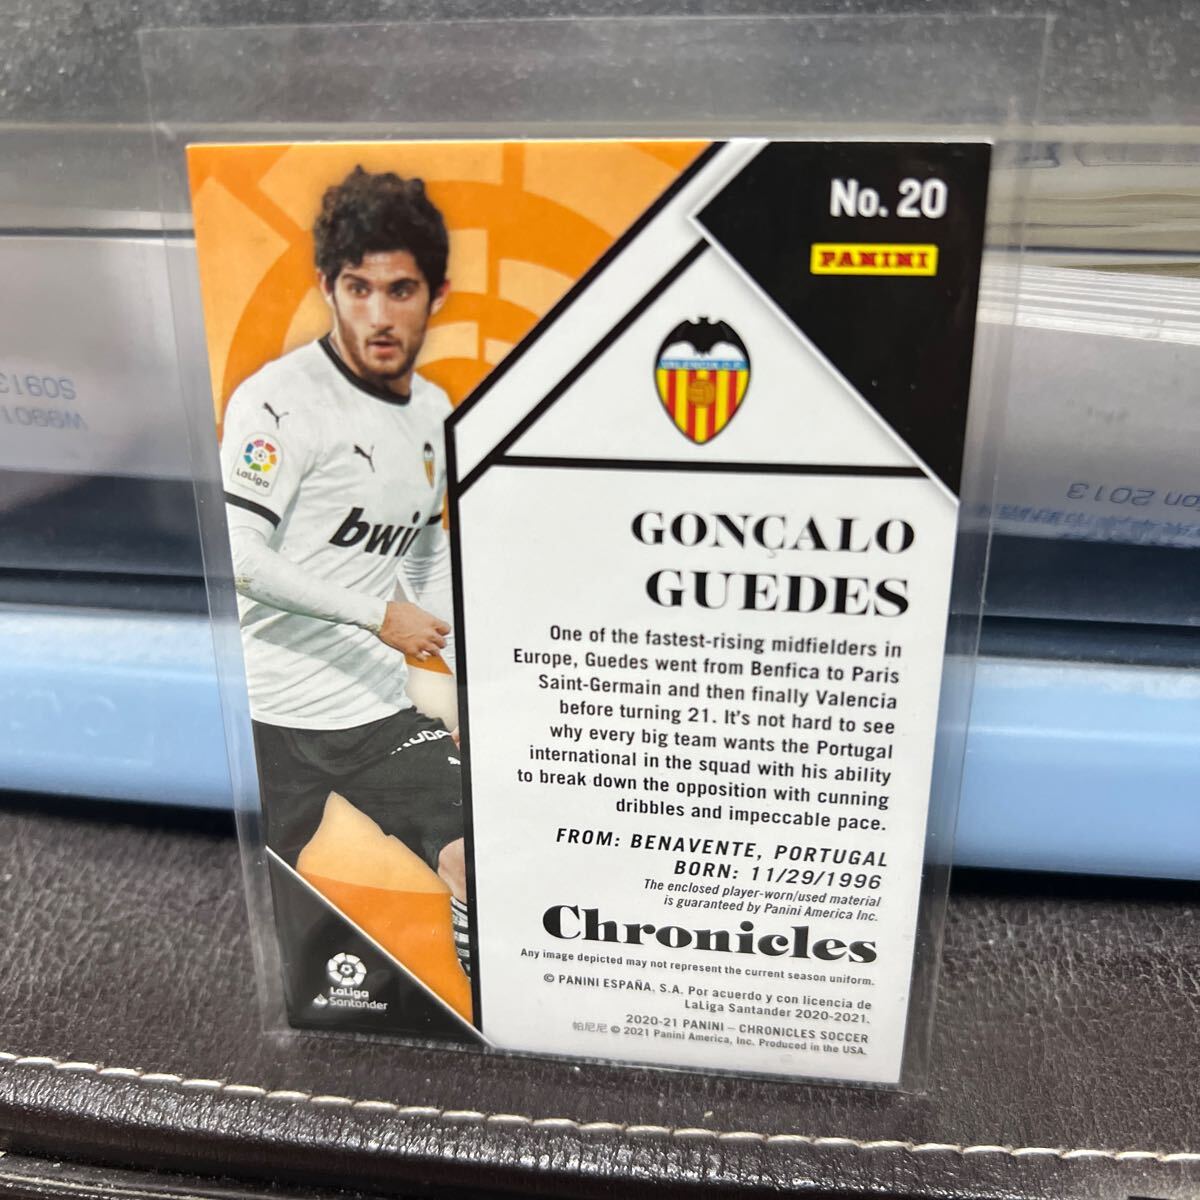 PANINI chronicle GONCALO GUEDES ジャージカード_画像2